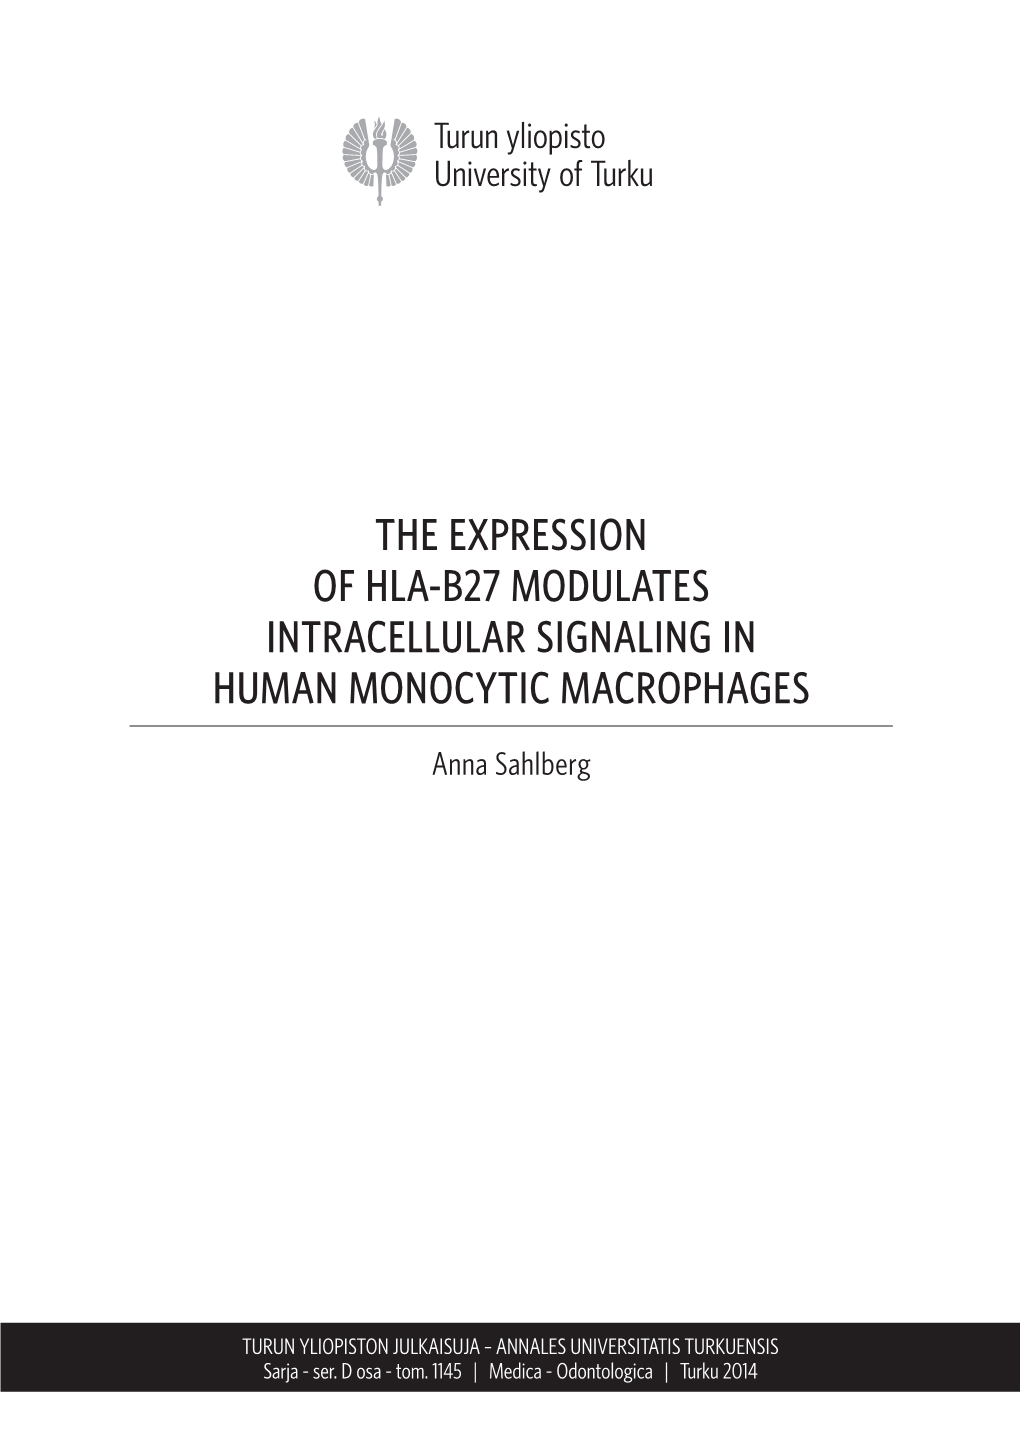 The Expression of Hla-B27 Modulates Intracellular Signaling in Human Monocytic Macrophages